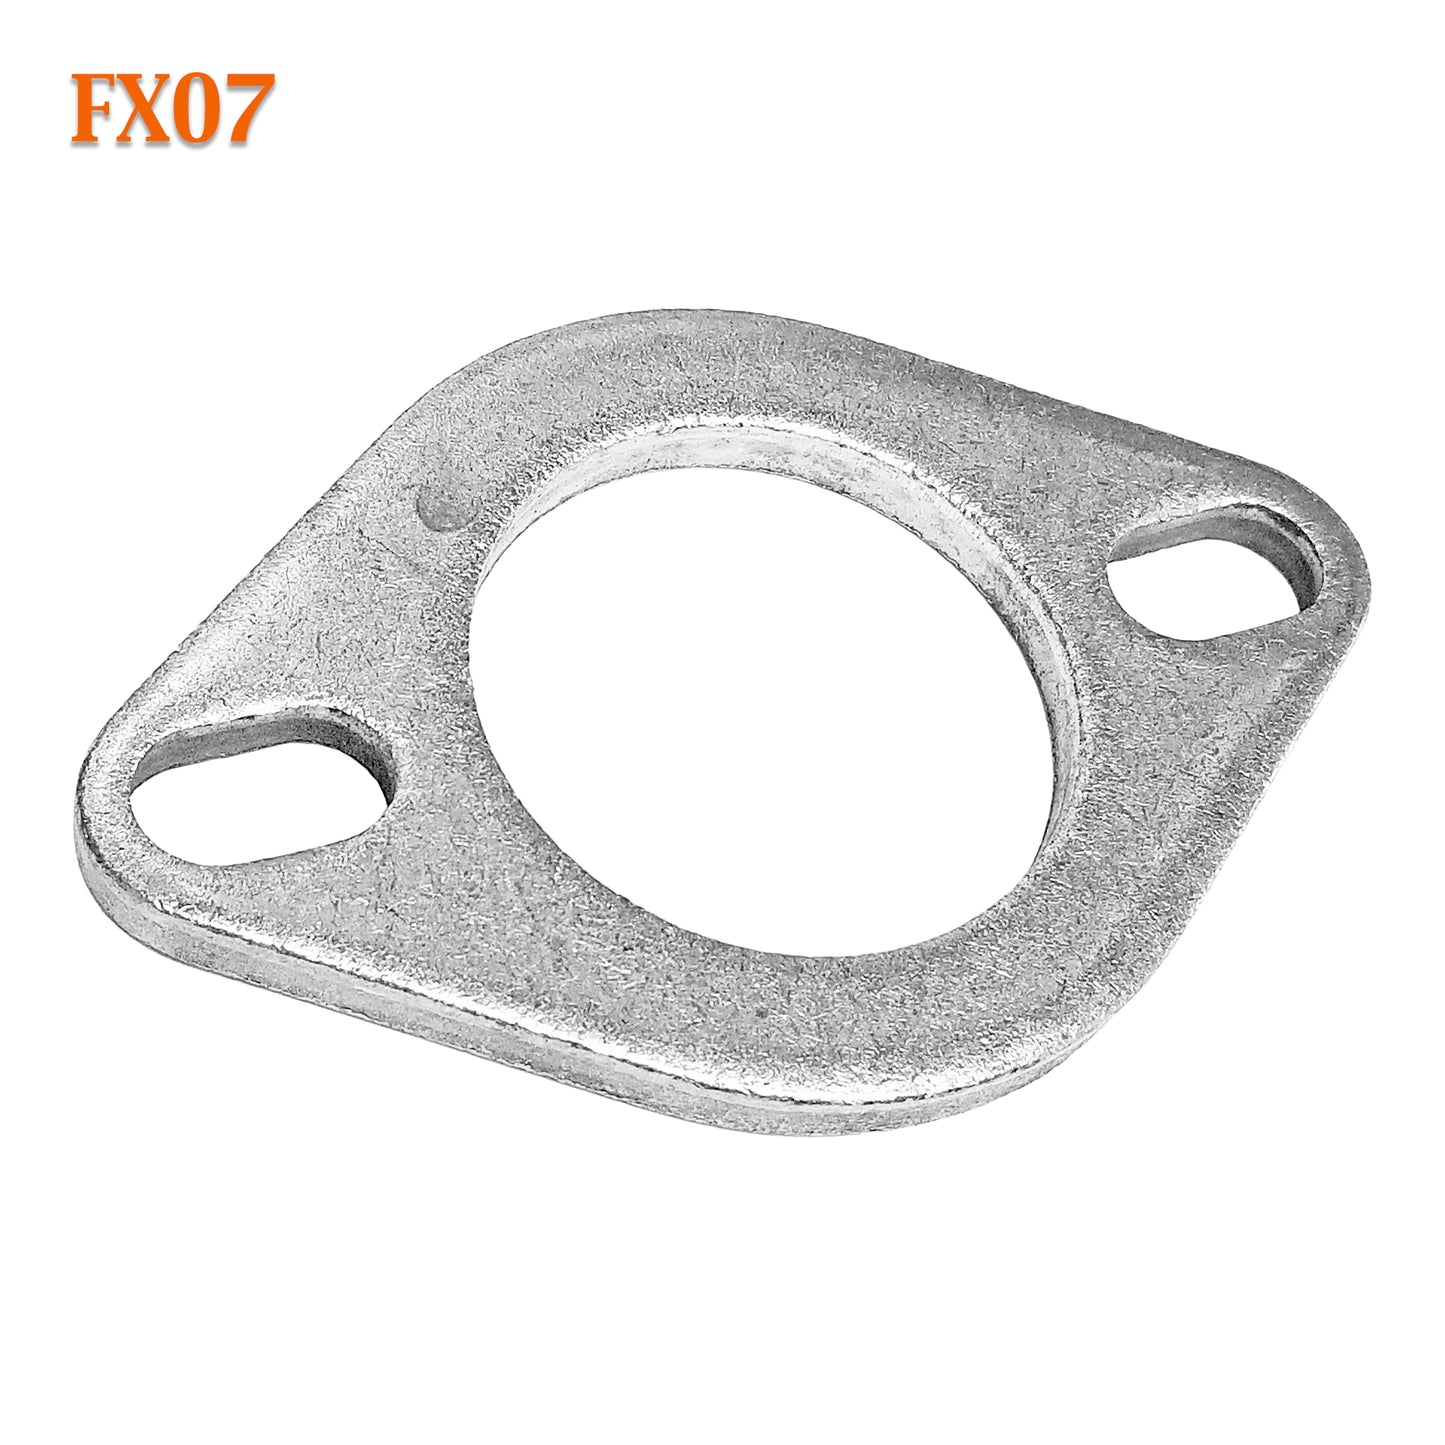 FX07 2 1/4" ID Flat Oval Two Bolt Exhaust Flange Fits 2 1/4" 2.25" -2 9/32" Pipe